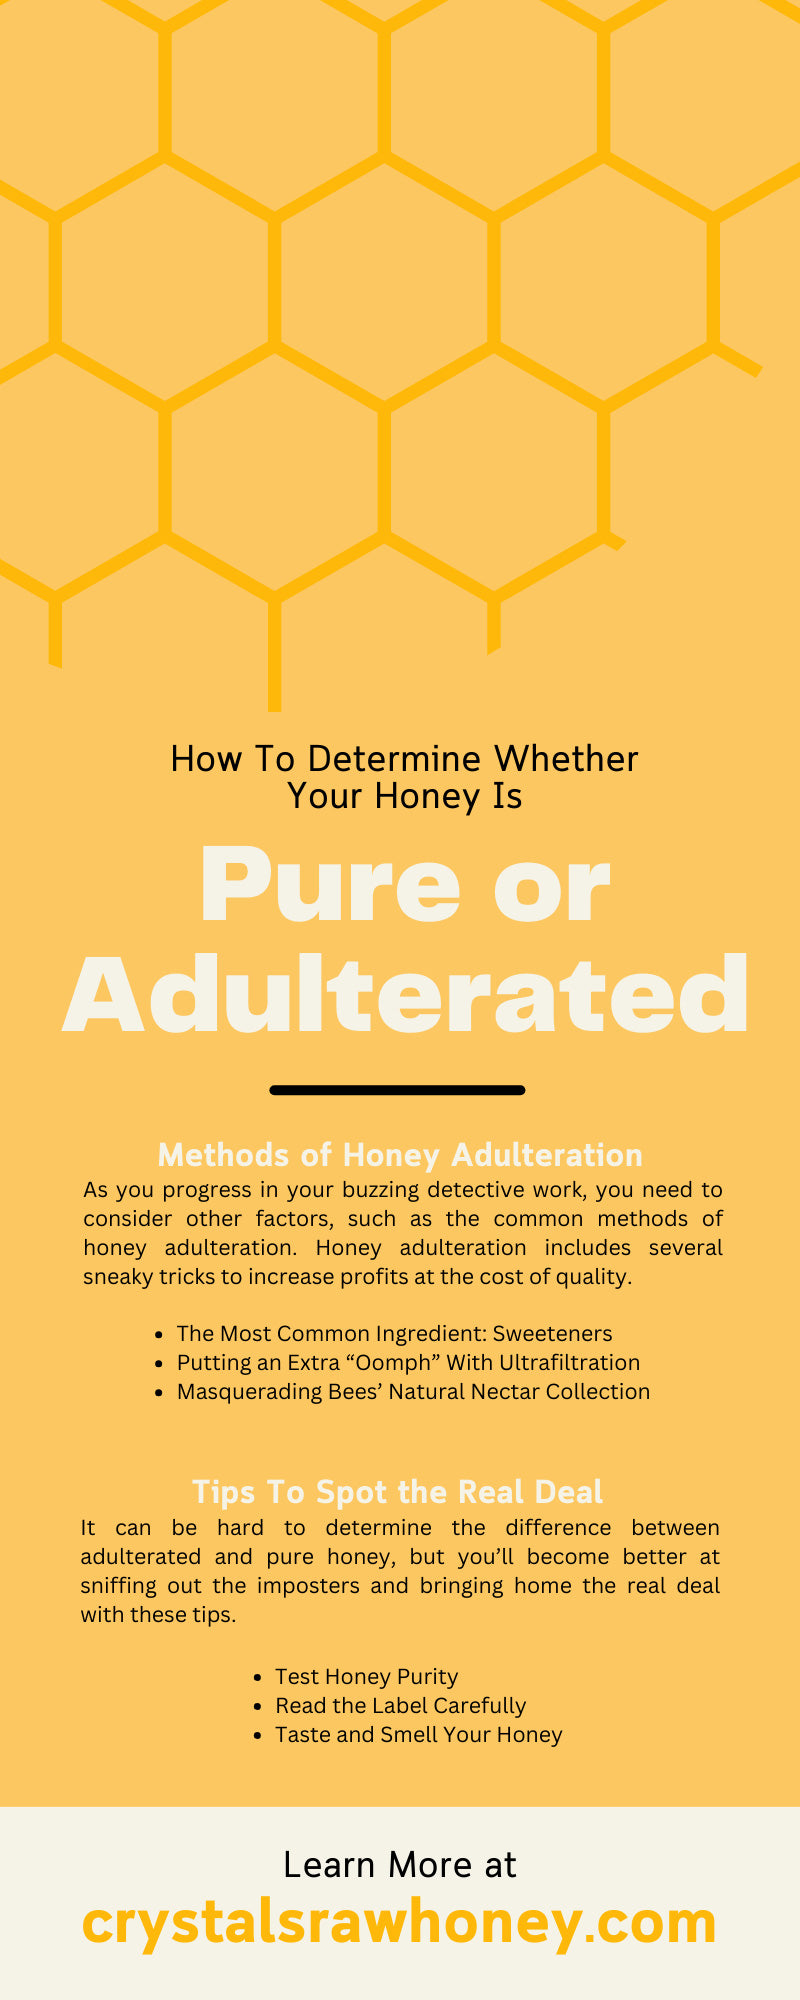 How To Determine Whether Your Honey Is Pure or Adulterated